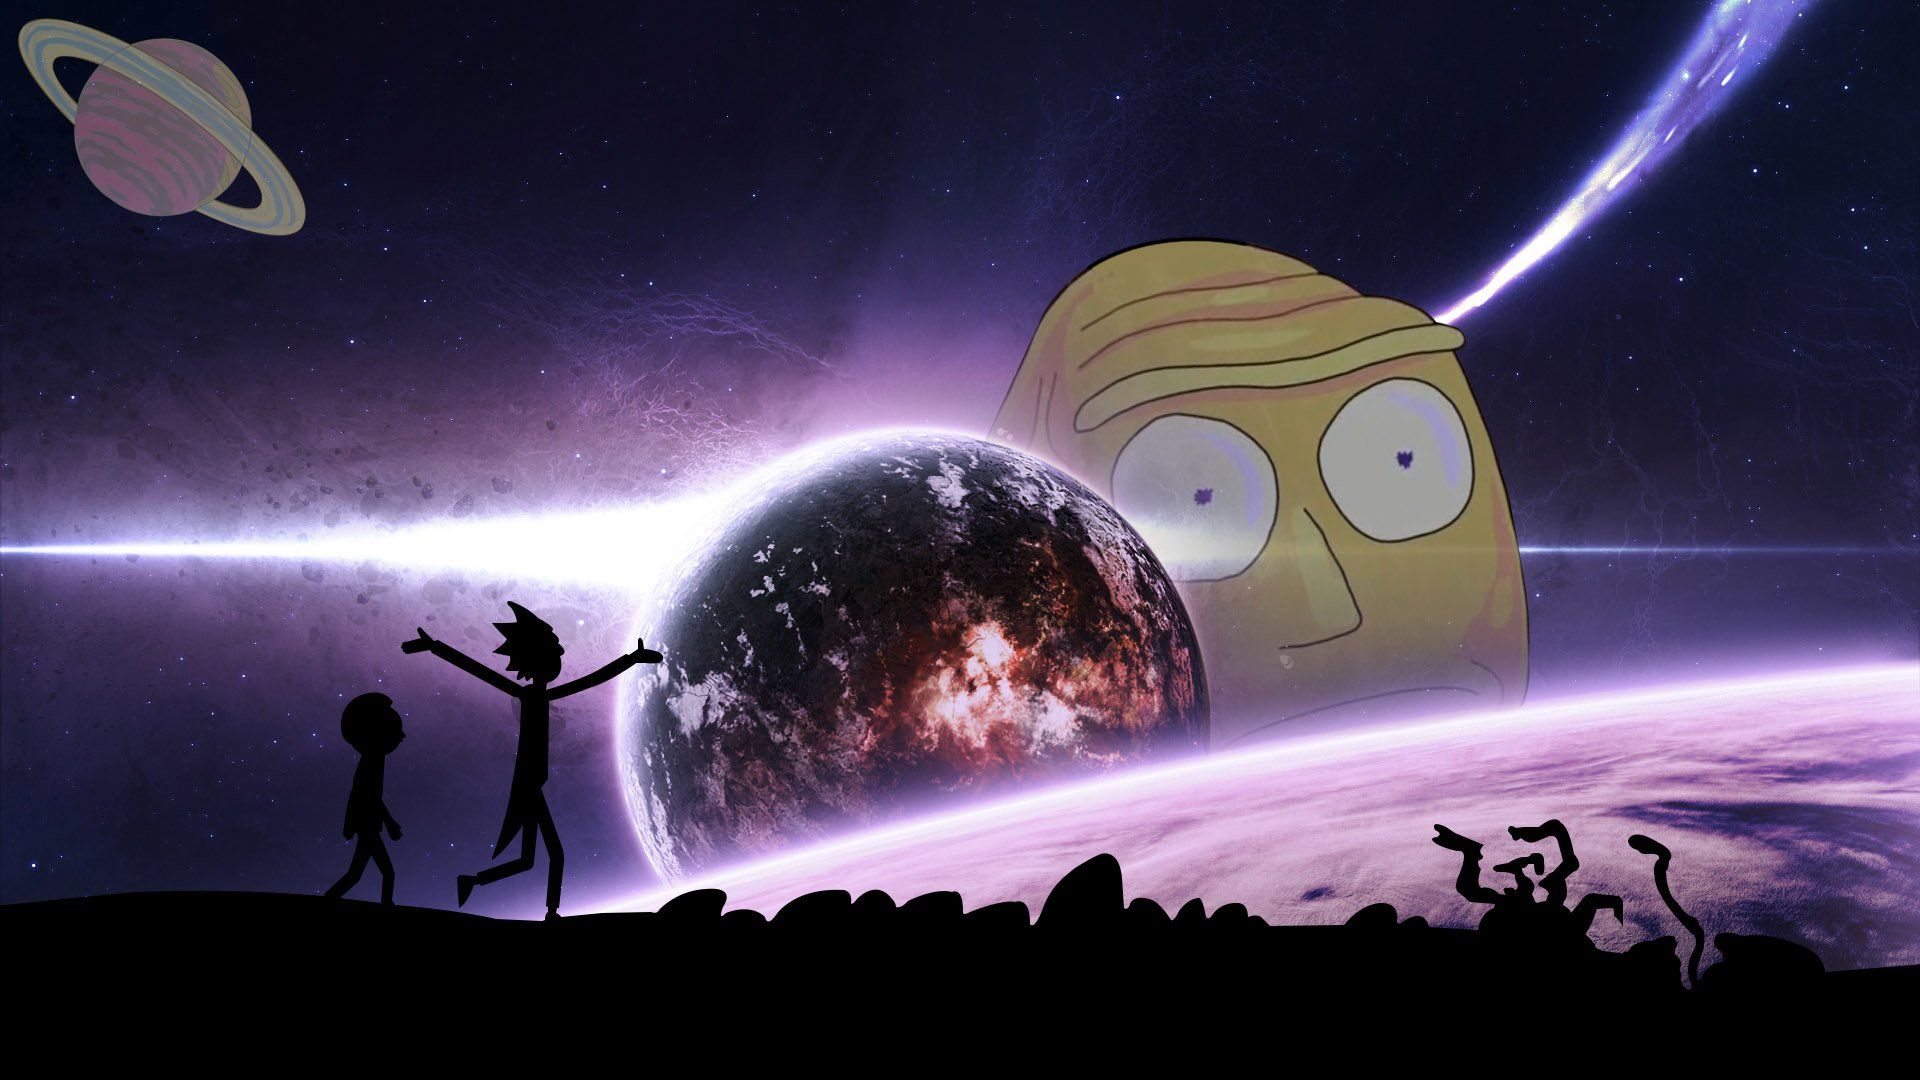 Rick_and Mory_Space HD Wallpaper. Background Imagex1080